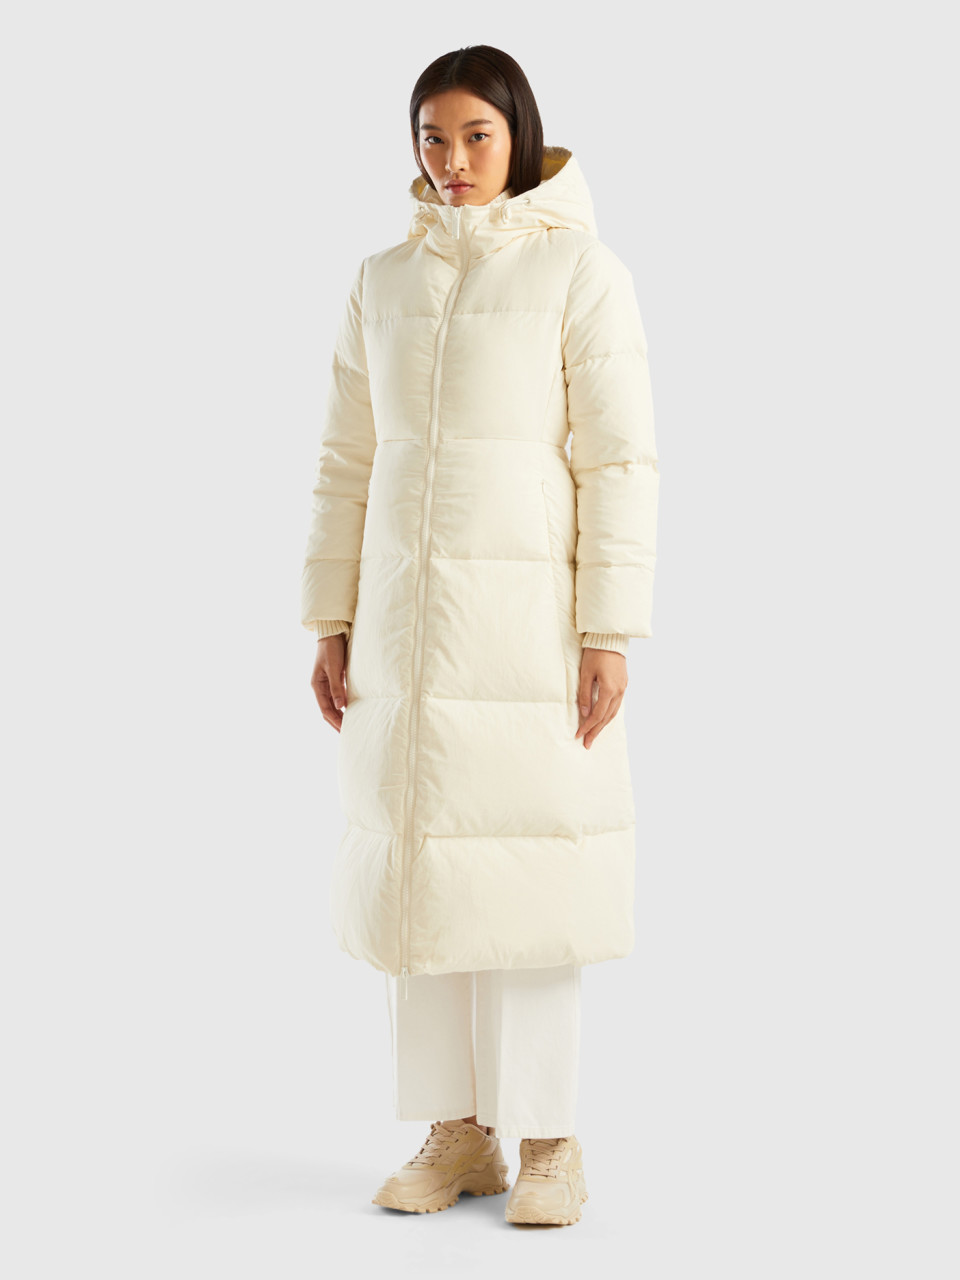 Benetton, Padded Jacket With Recycled Feathers, Creamy White, Women